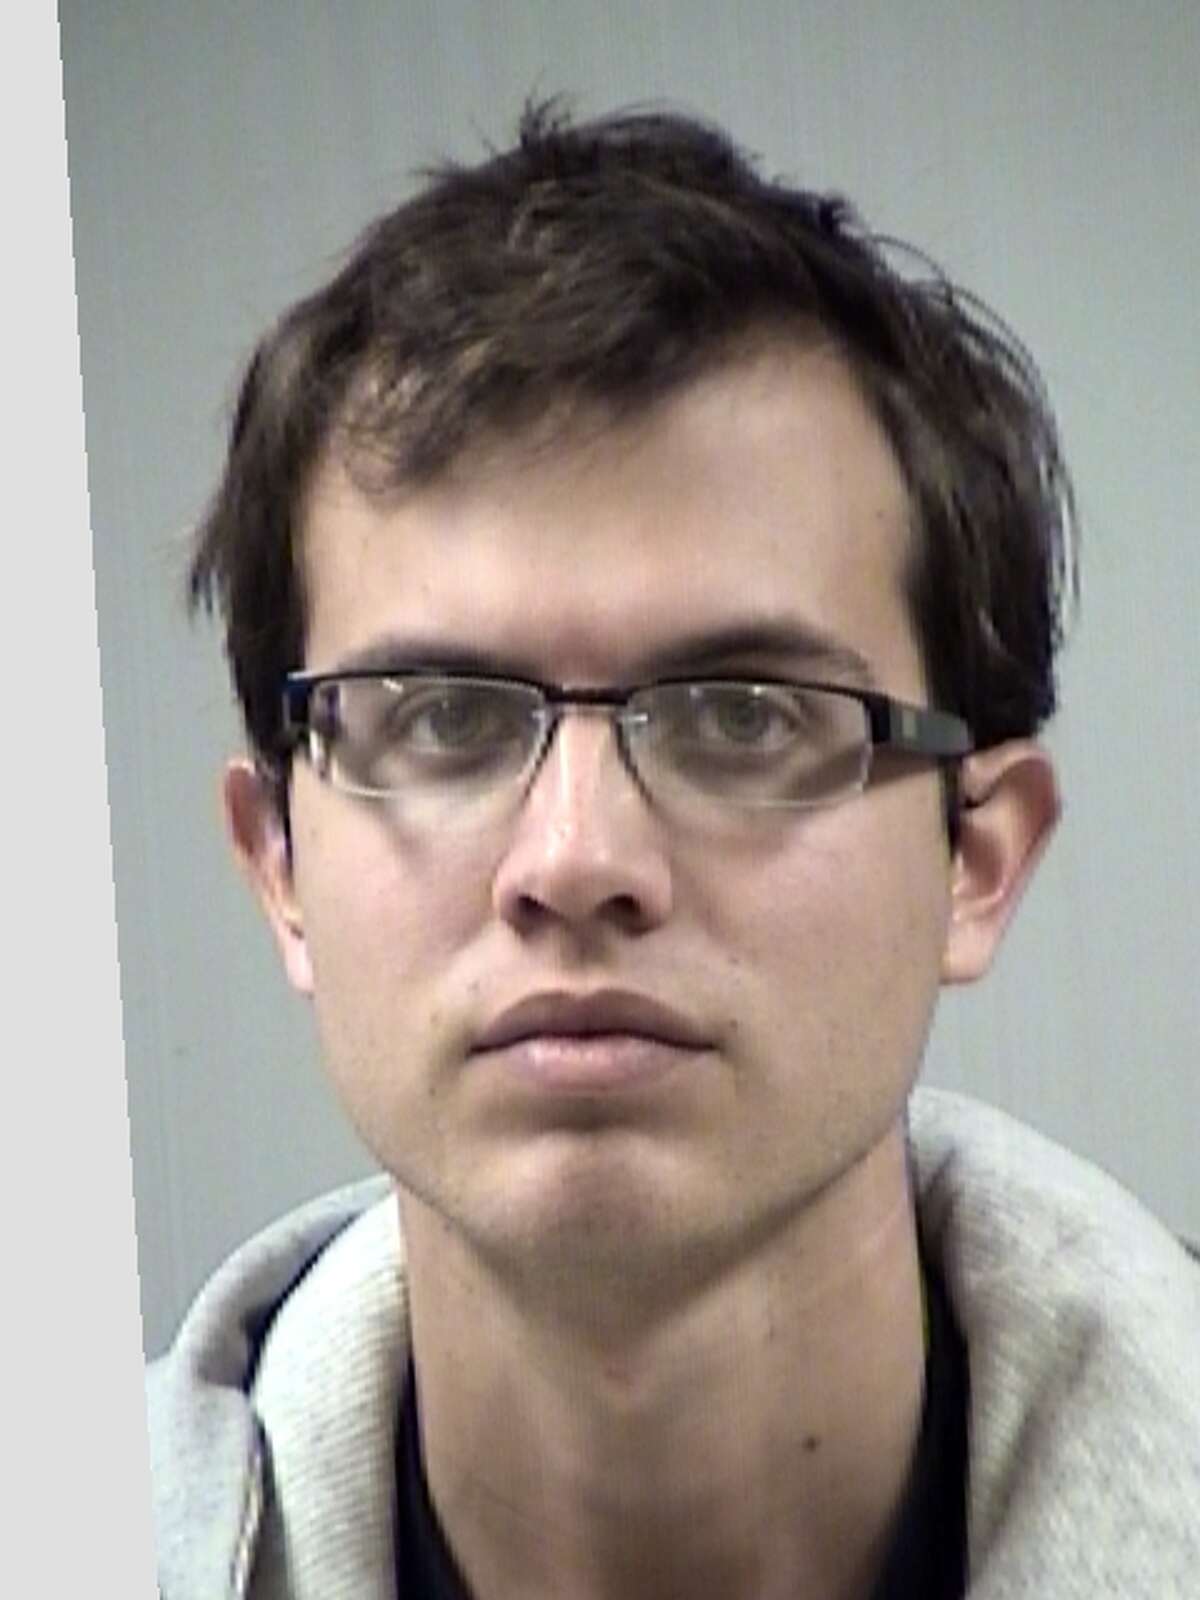 Northside Independent School District on Thursday fired an elementary teacher's aide, Jason Anthony Miller, 25, accused of identity theft.